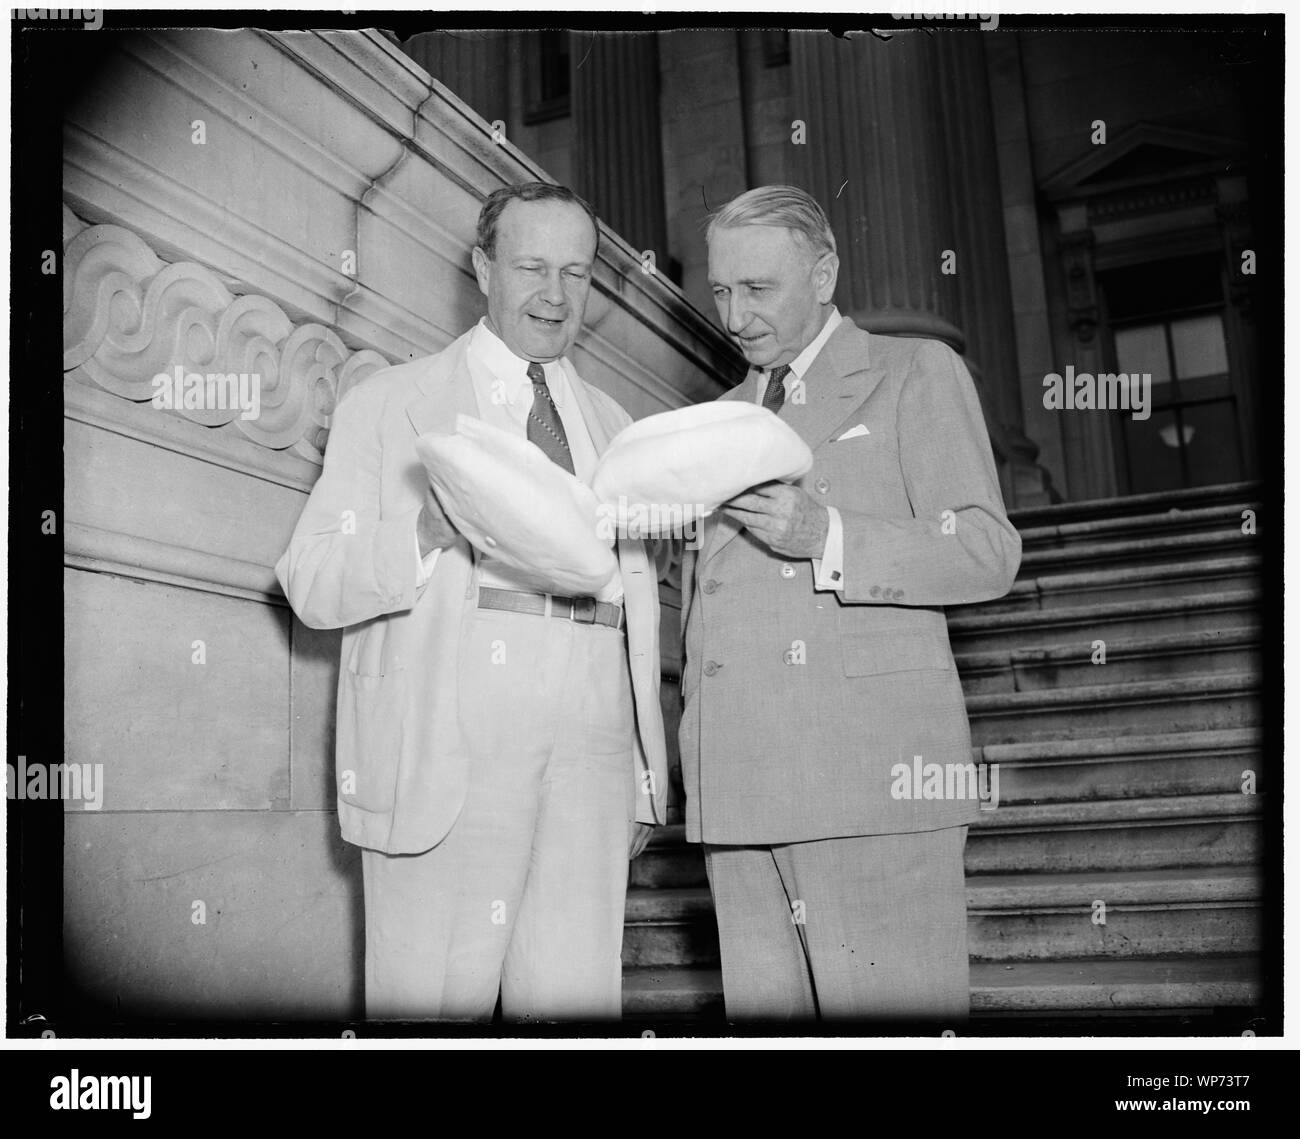 Largest and smallest heads in Senate. Washington, D.C., June 15. A gift of light summer caps for the home going Senators today disclosed that Senator Robert J. Bulkley, Ohio, wearing a size 73/4 has the largest head in the Senate; and Senator Walter F. George, (right) the smallest with a cap size of 63/4 being a perfect fit, 6/15/38 Stock Photo